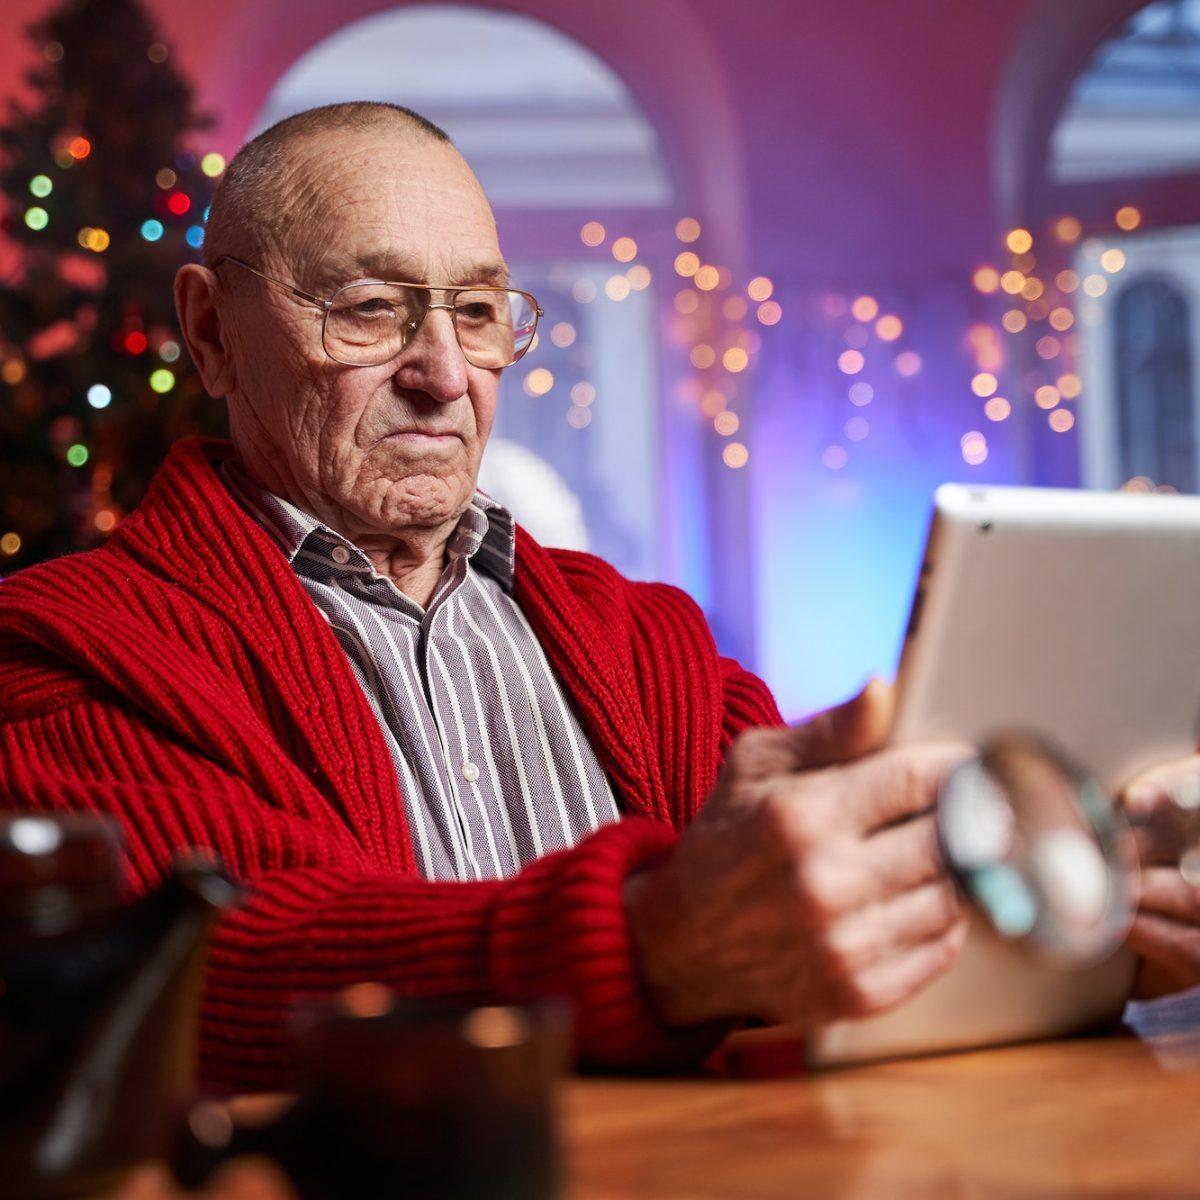 Serious elder man sitting at table with tablet in colourful room